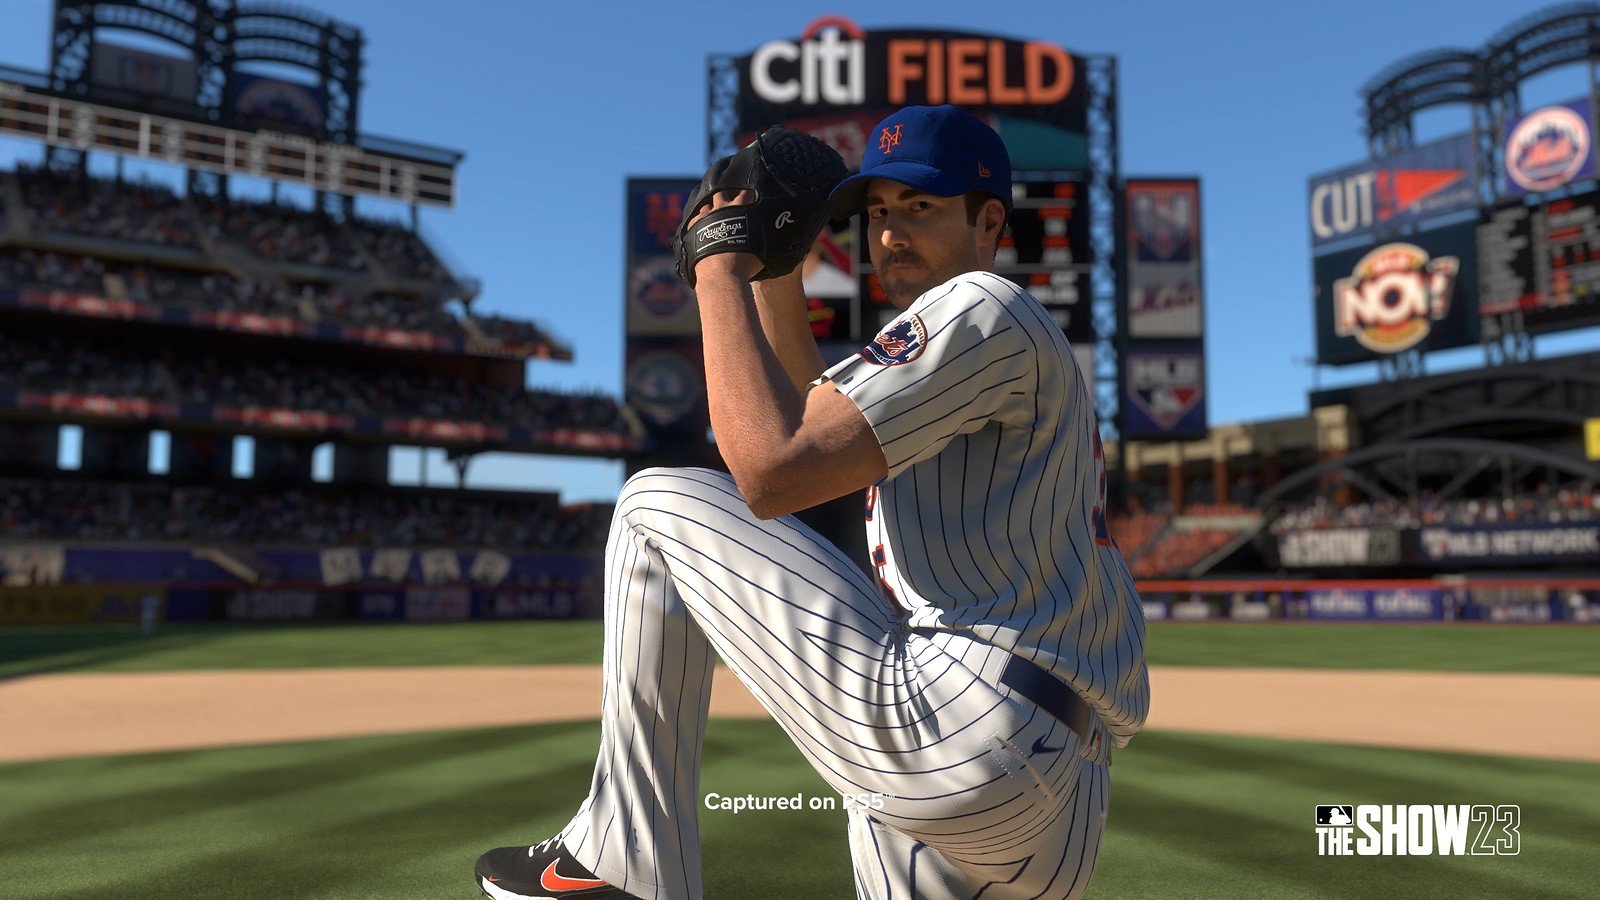 MLB The Show 23 best batting stances: Top 3 options listed